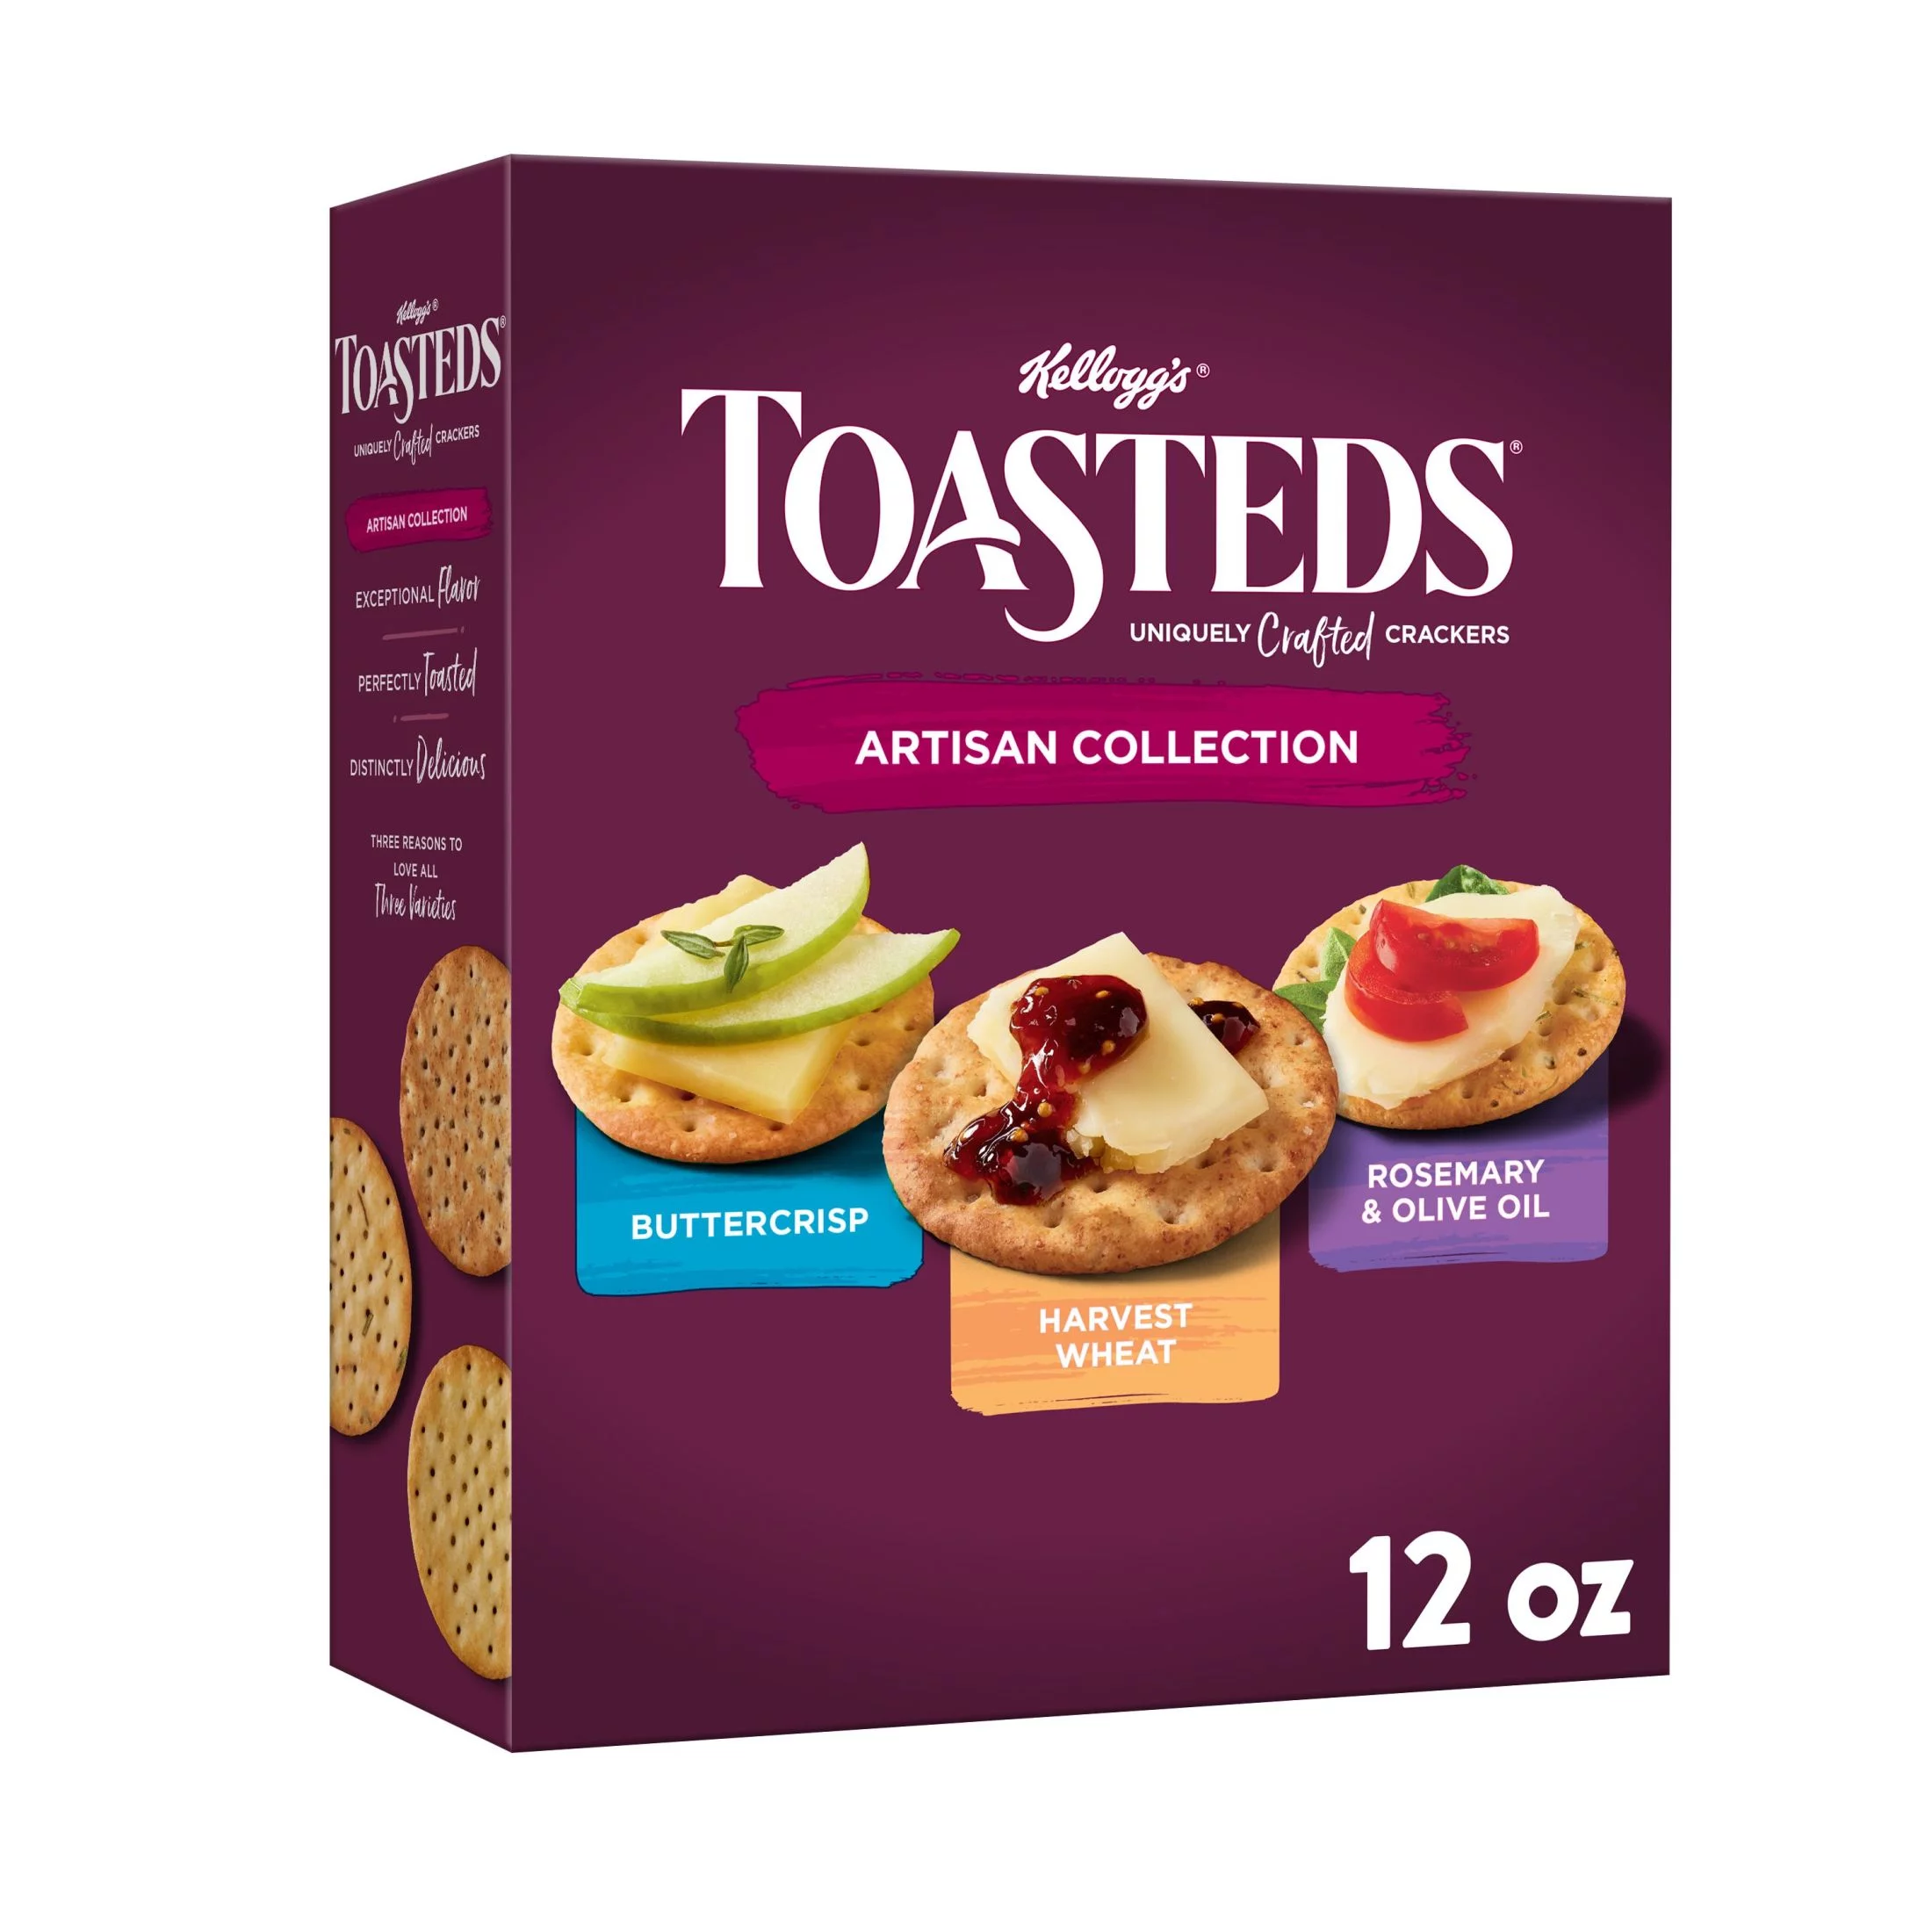 Toasteds Variety Pack Crackers, Party Snacks, 12 oz